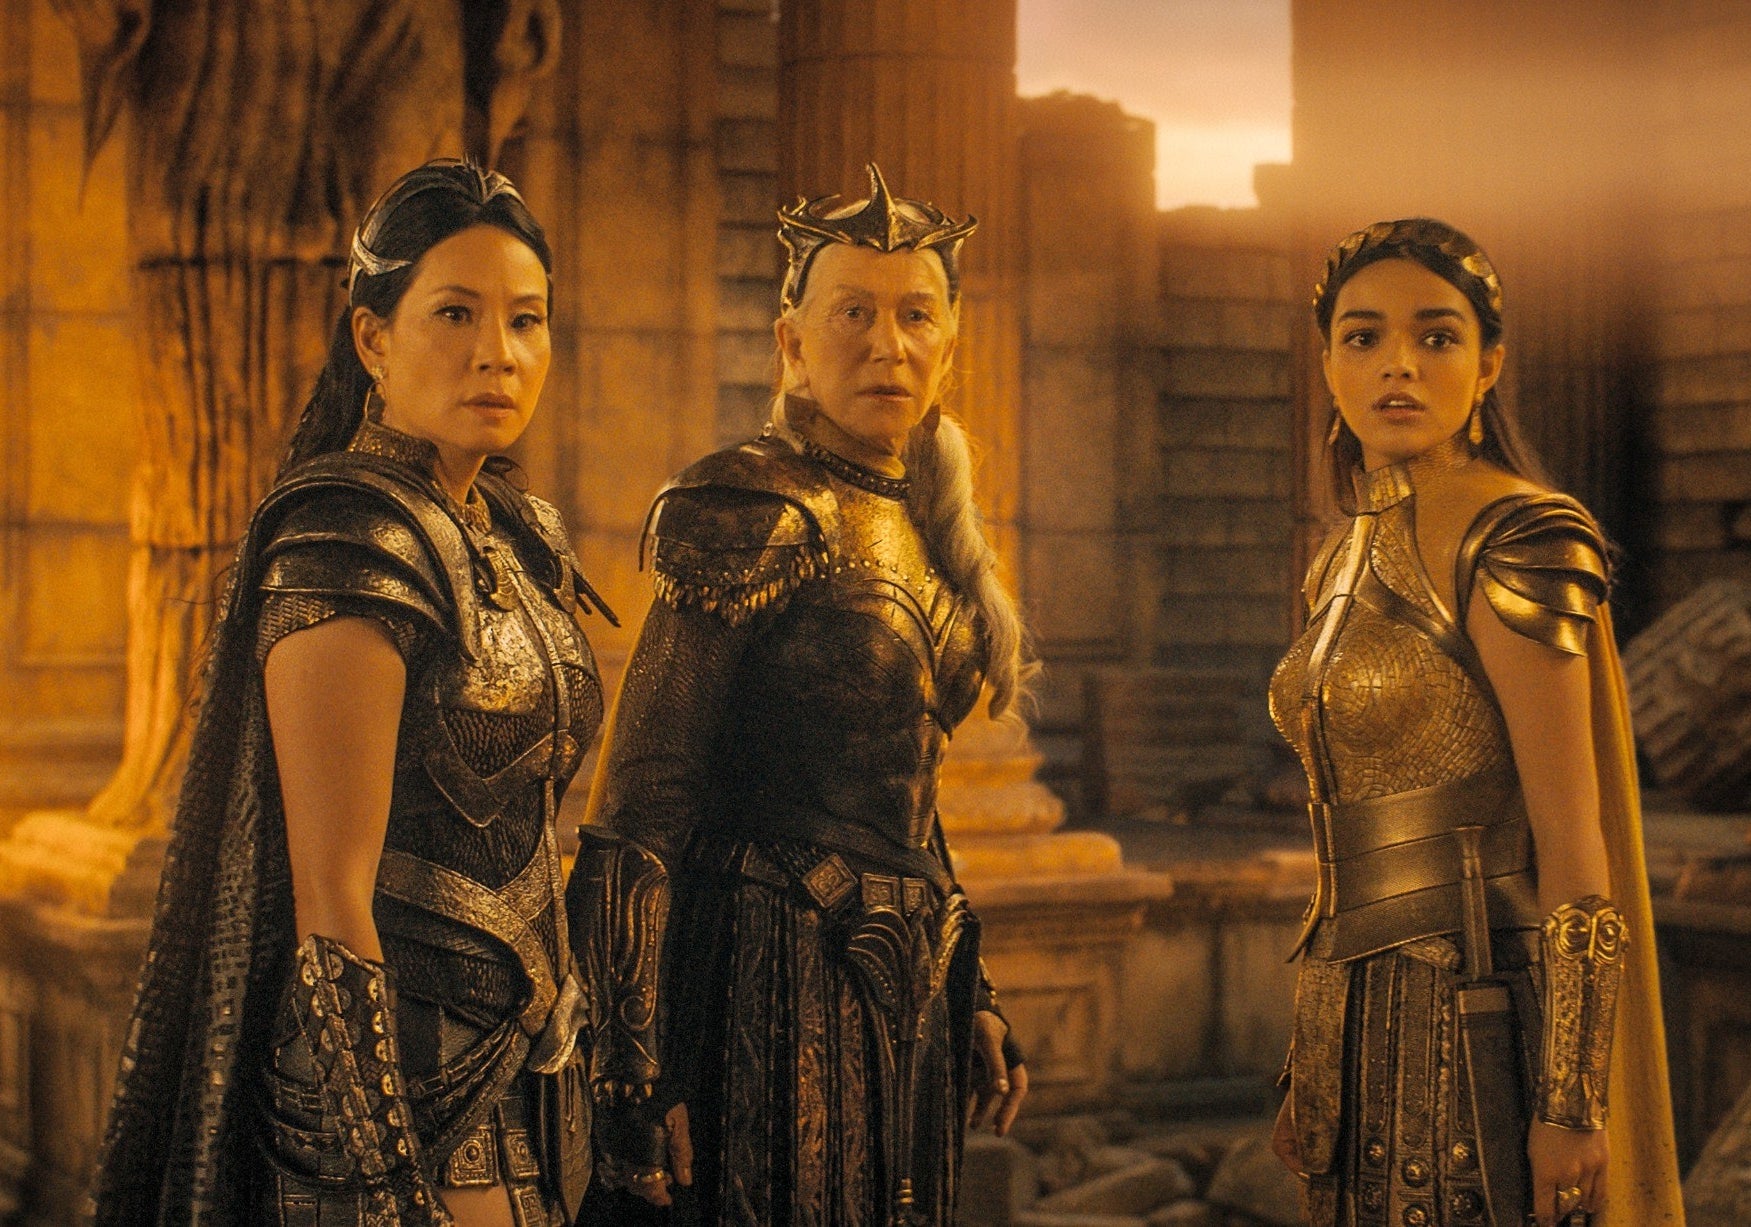 Rachel wears a suit of armor while standing with her costars in the film